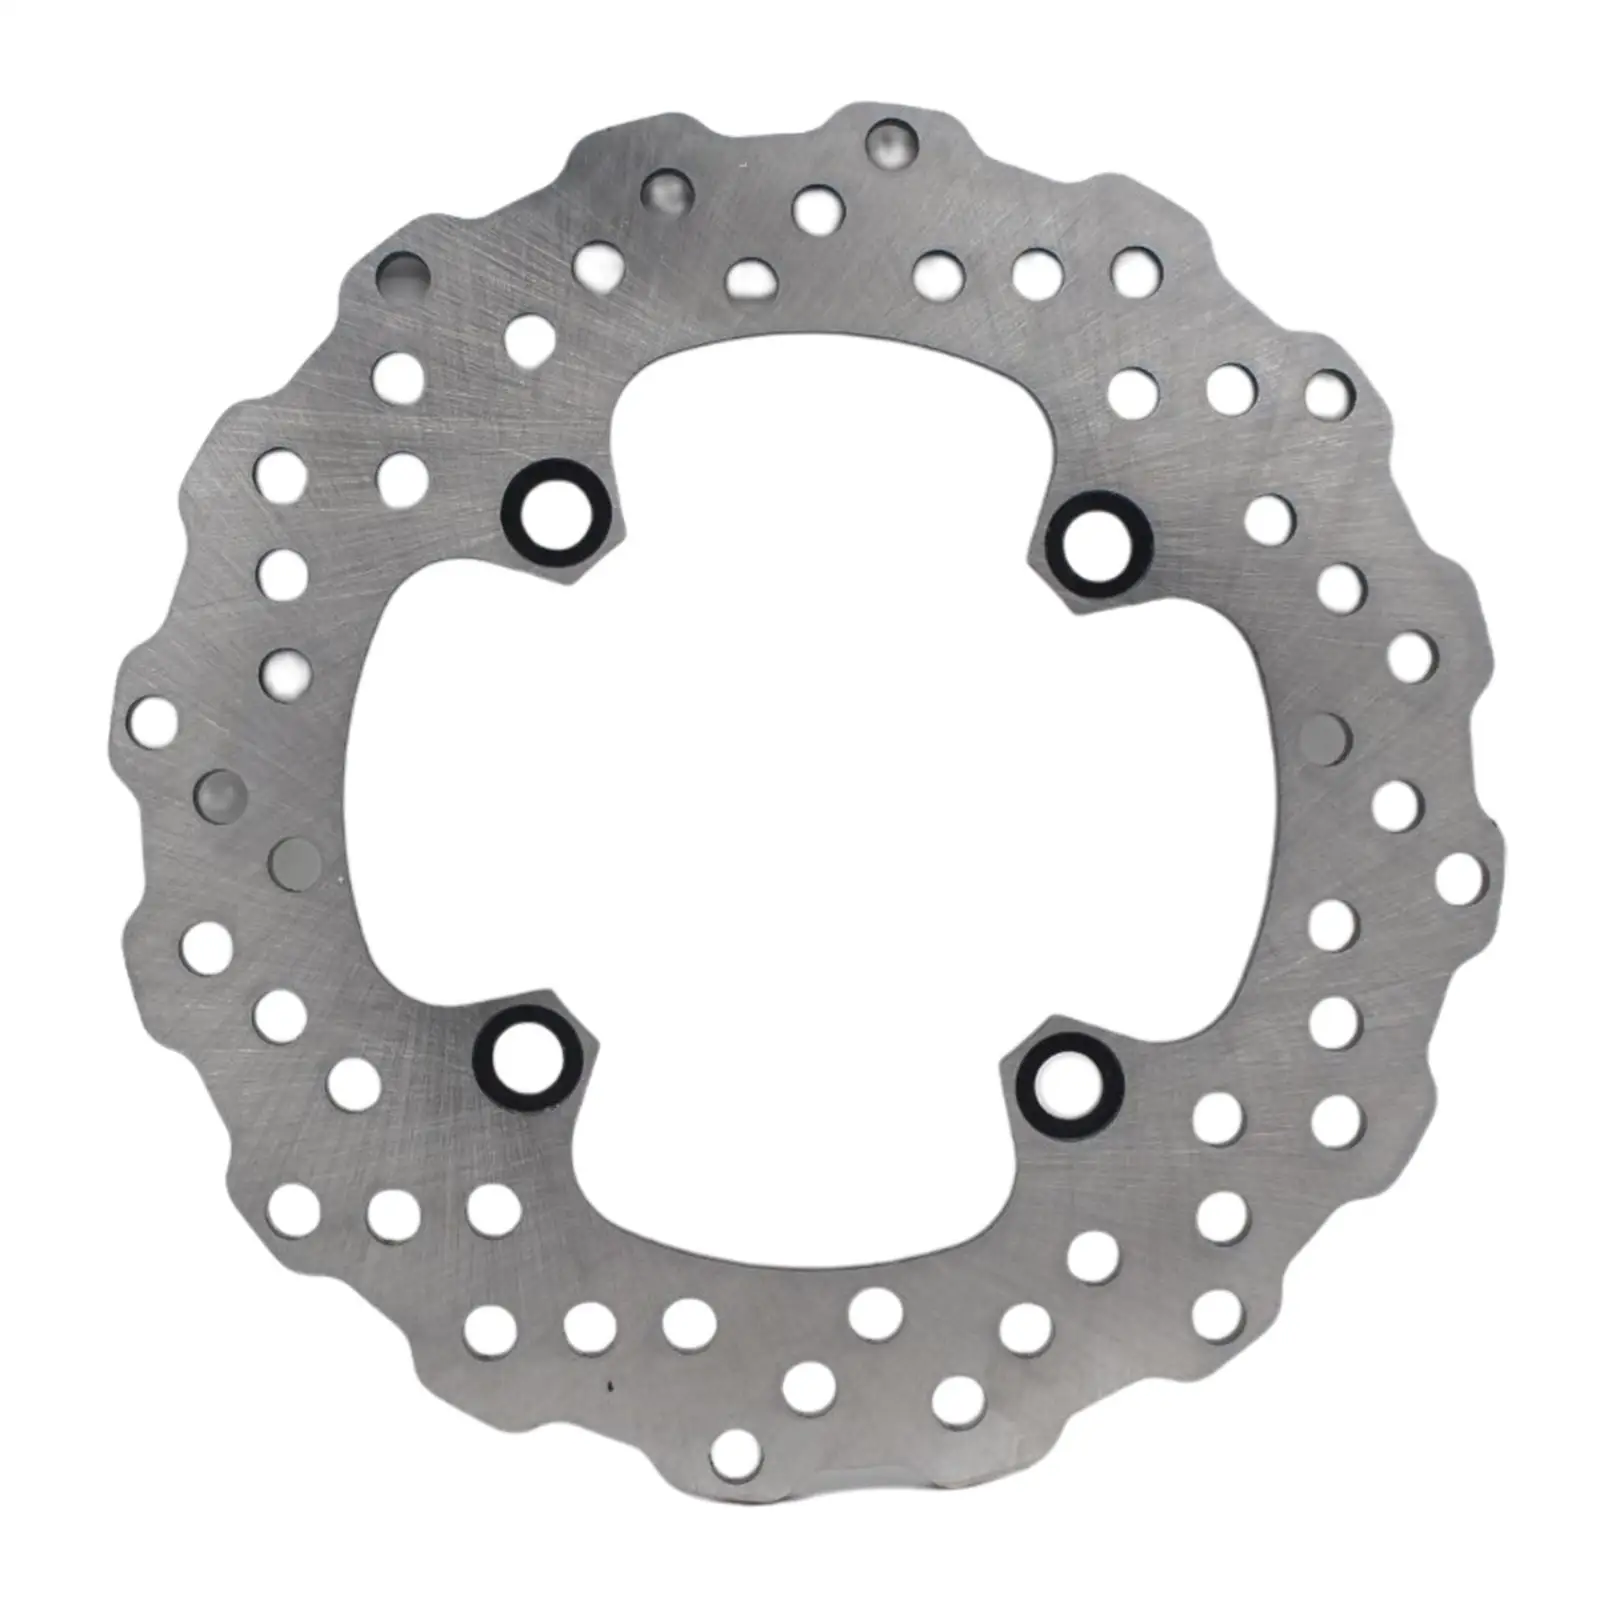 Rear Brake Disc Rotor, Motorcycle Replacement, Accessories 220mm  for   ER-6 Cc 